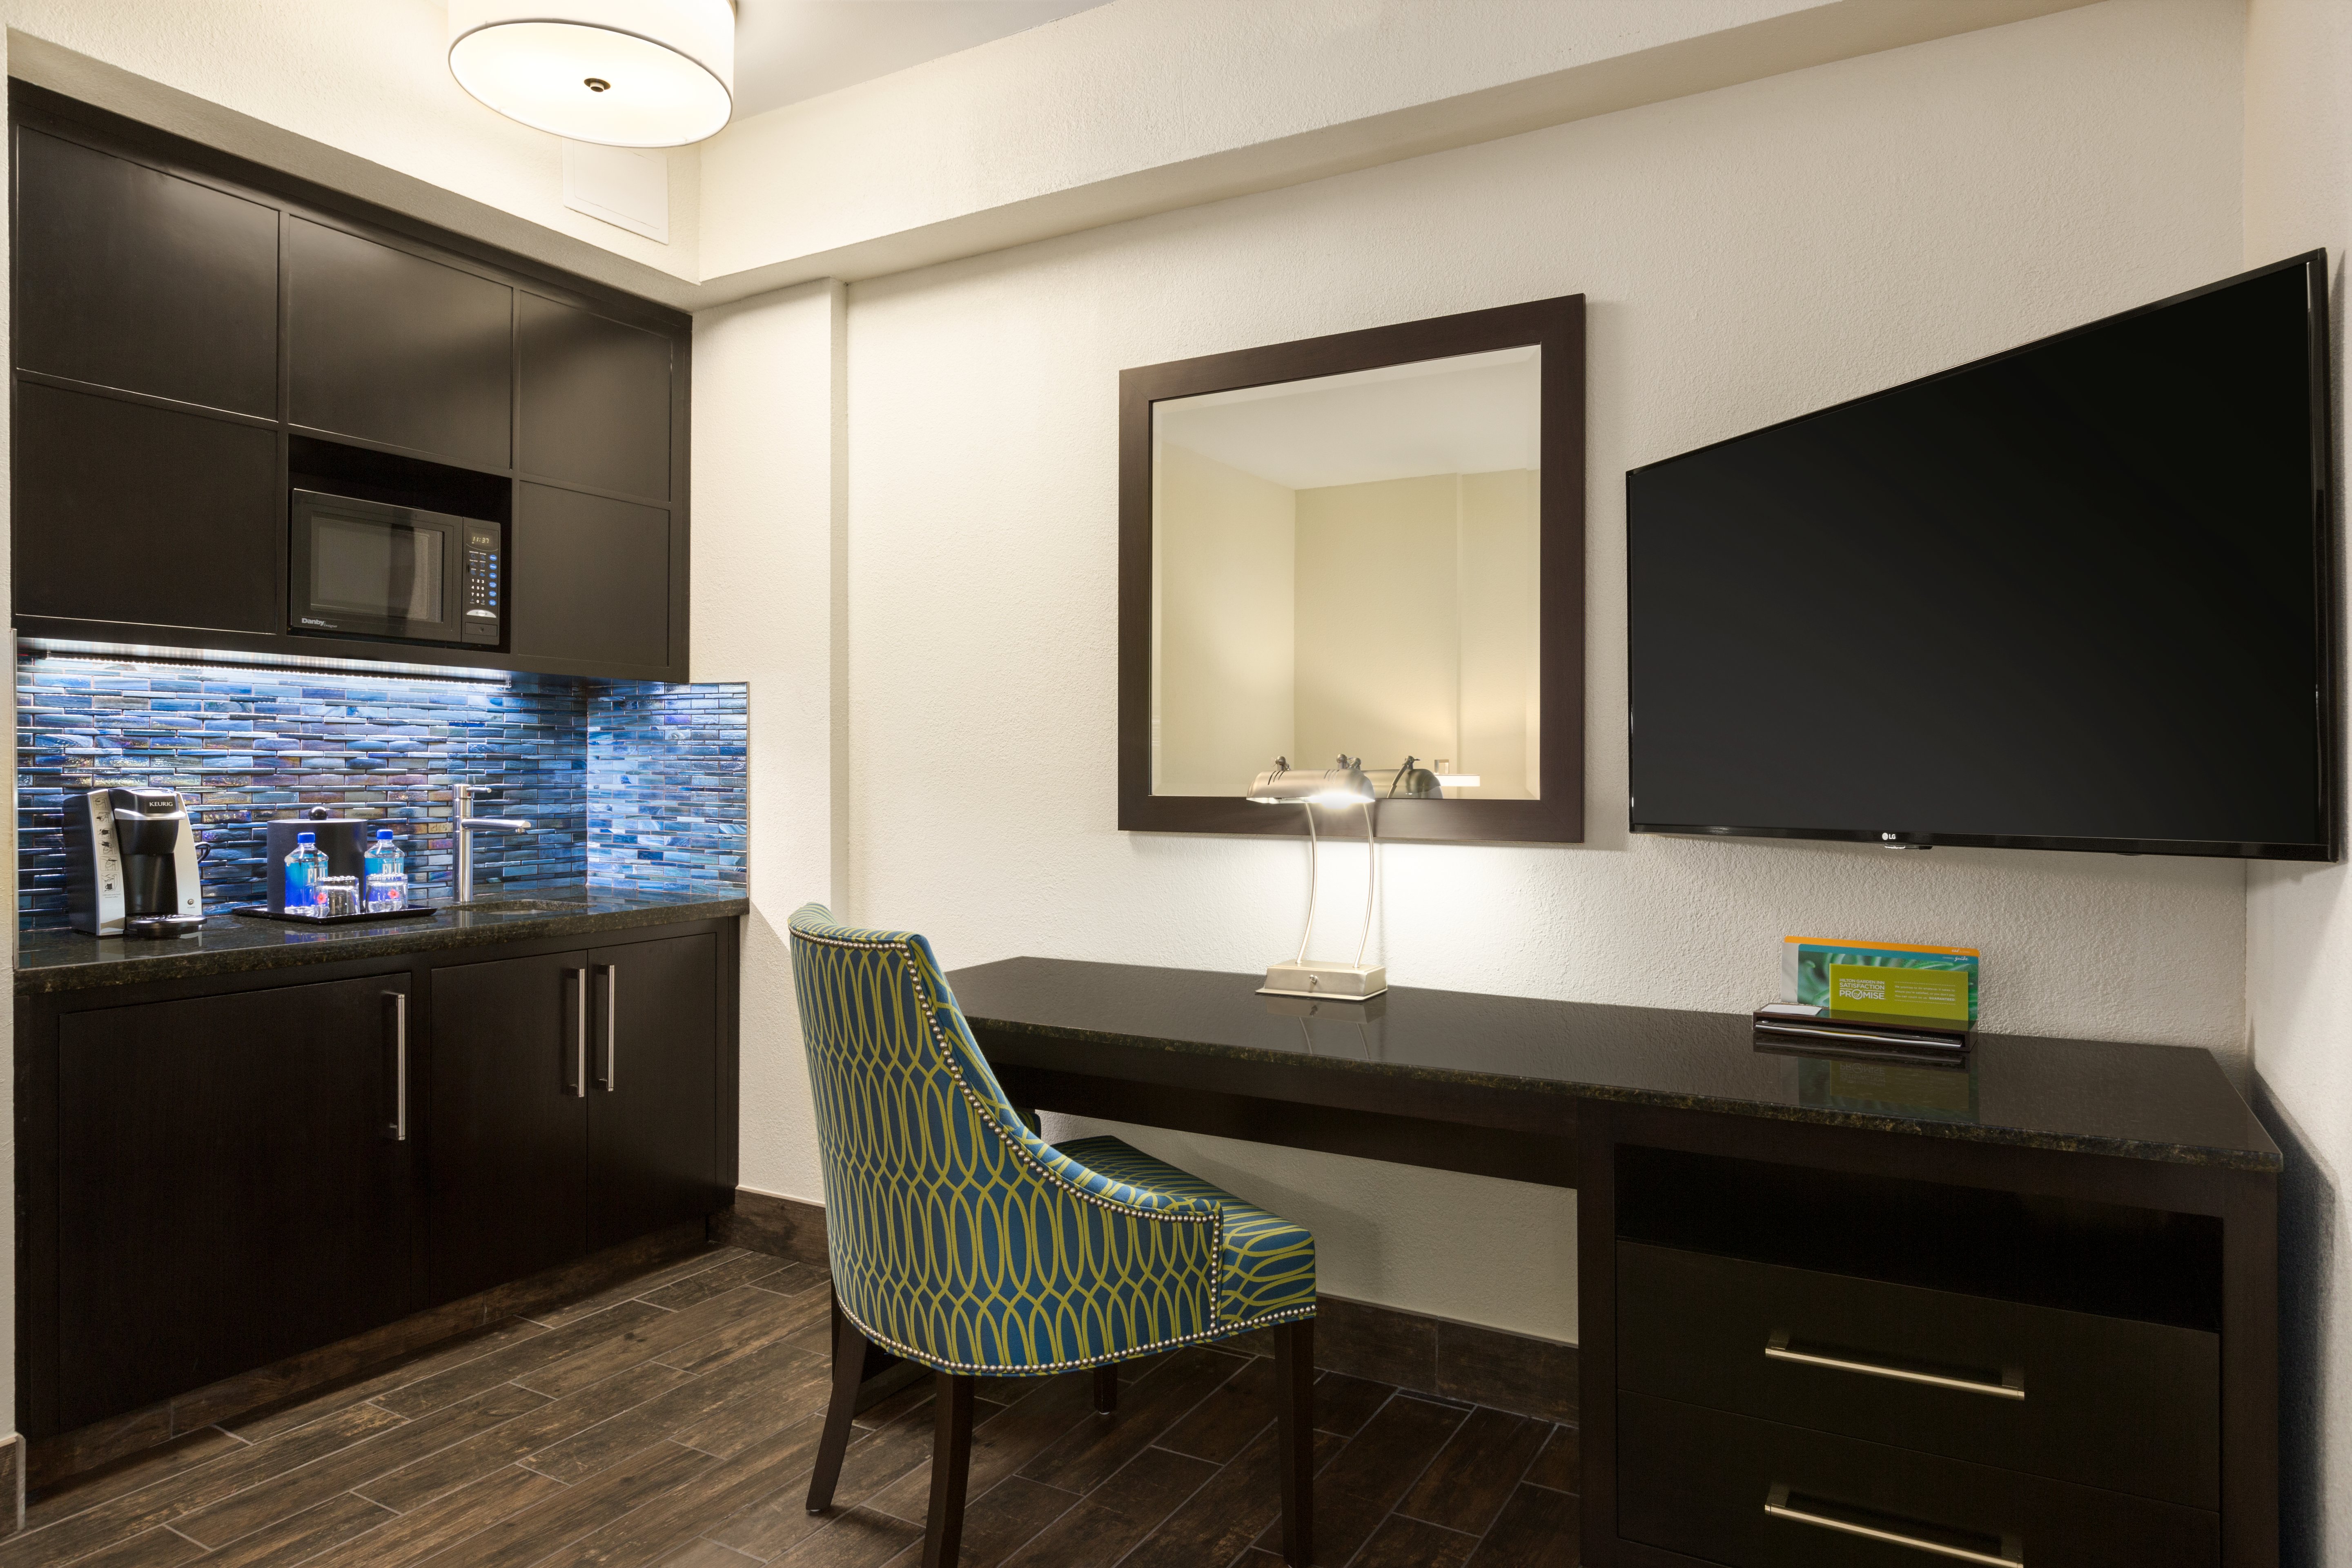 Wet Bar Area With Keurig, Bottled Water, Ice Bucket, Microwave, and Sink and TV Above Work Desk in Corner.of Junior Suite